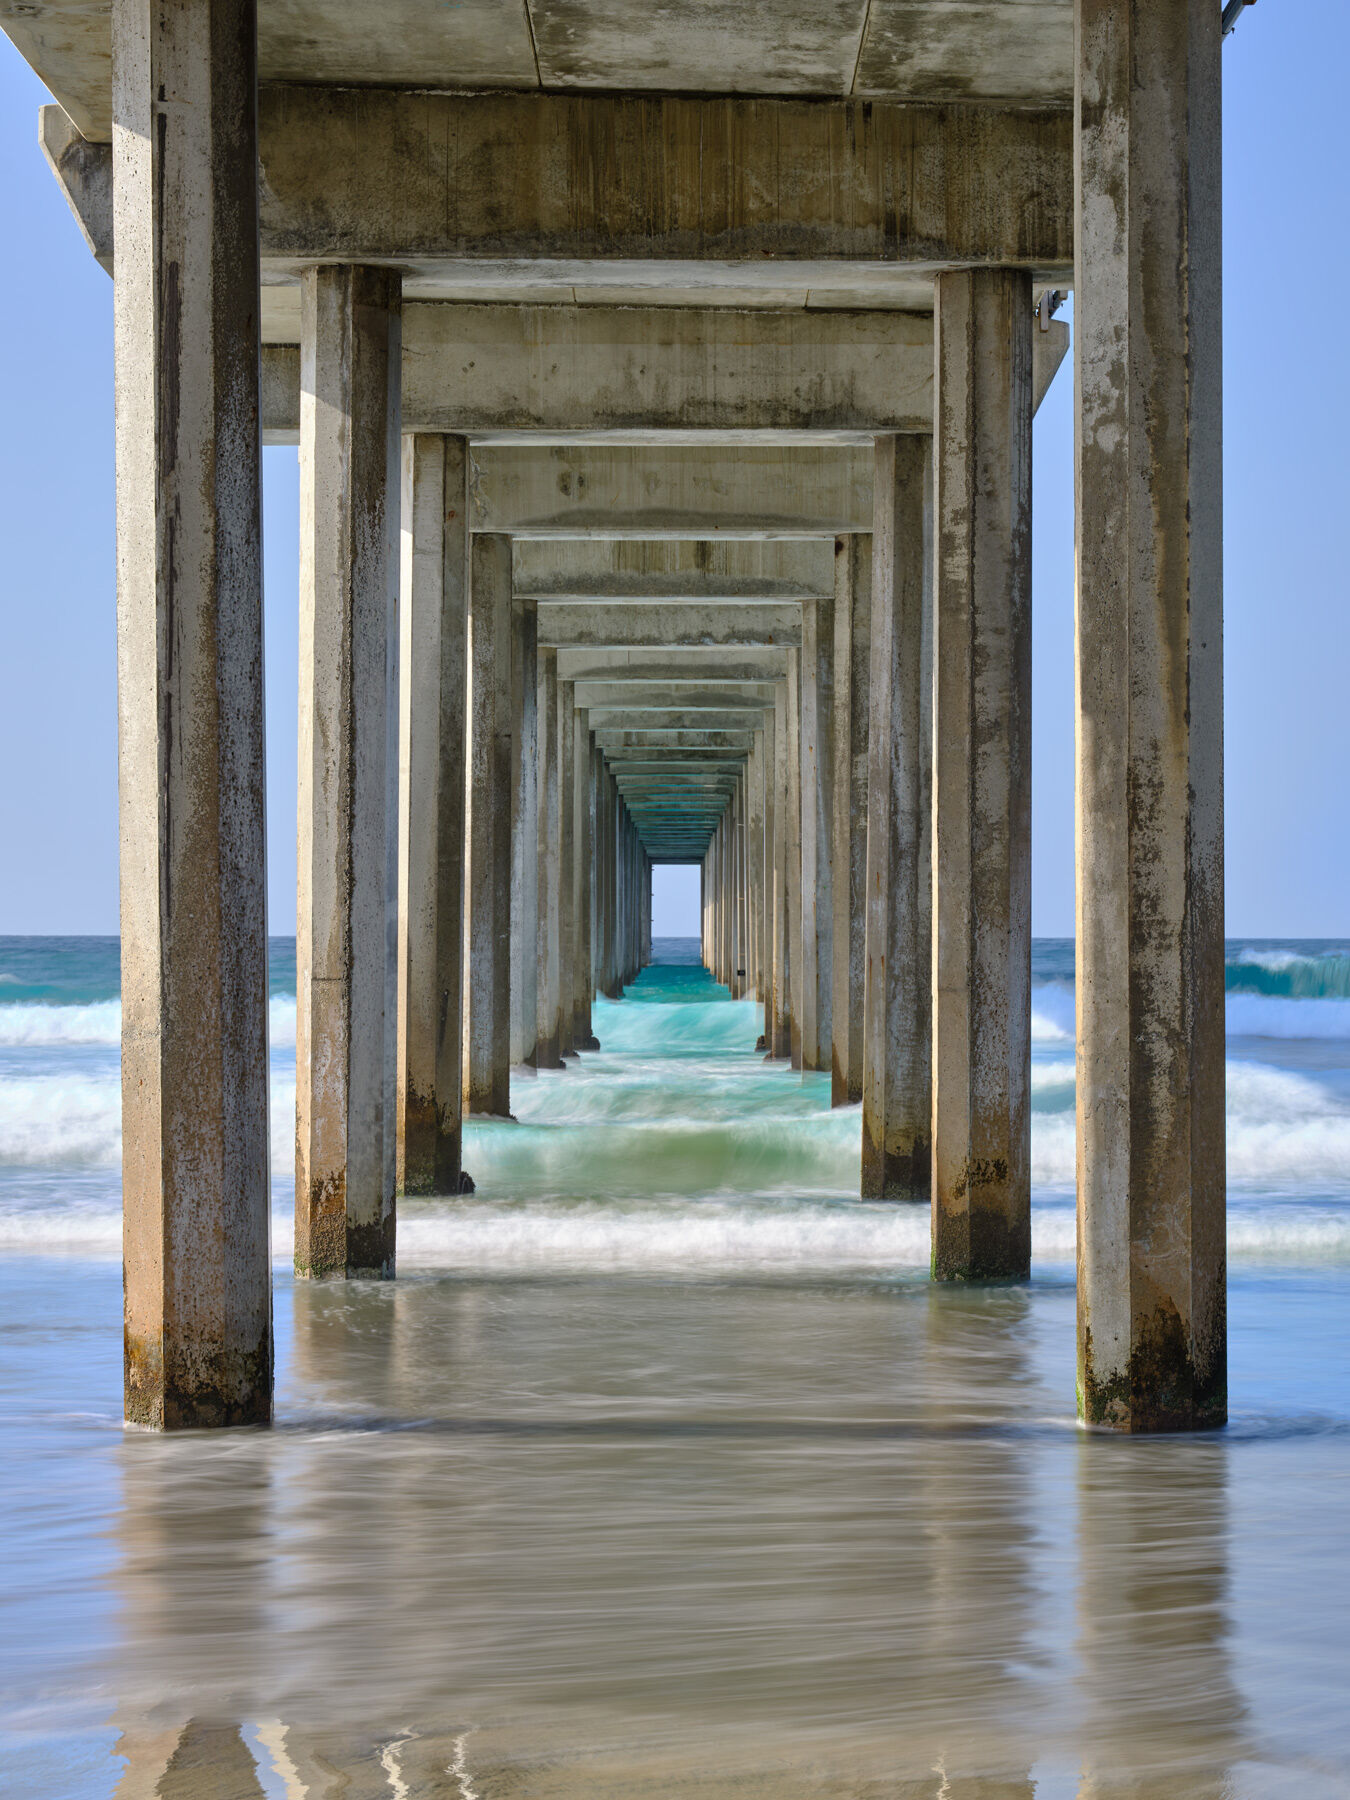 a beautiful view looking down Scripps Pier in La Jolla, California during the daytime showcasing the beautiful blue water of the Pacific Ocean.